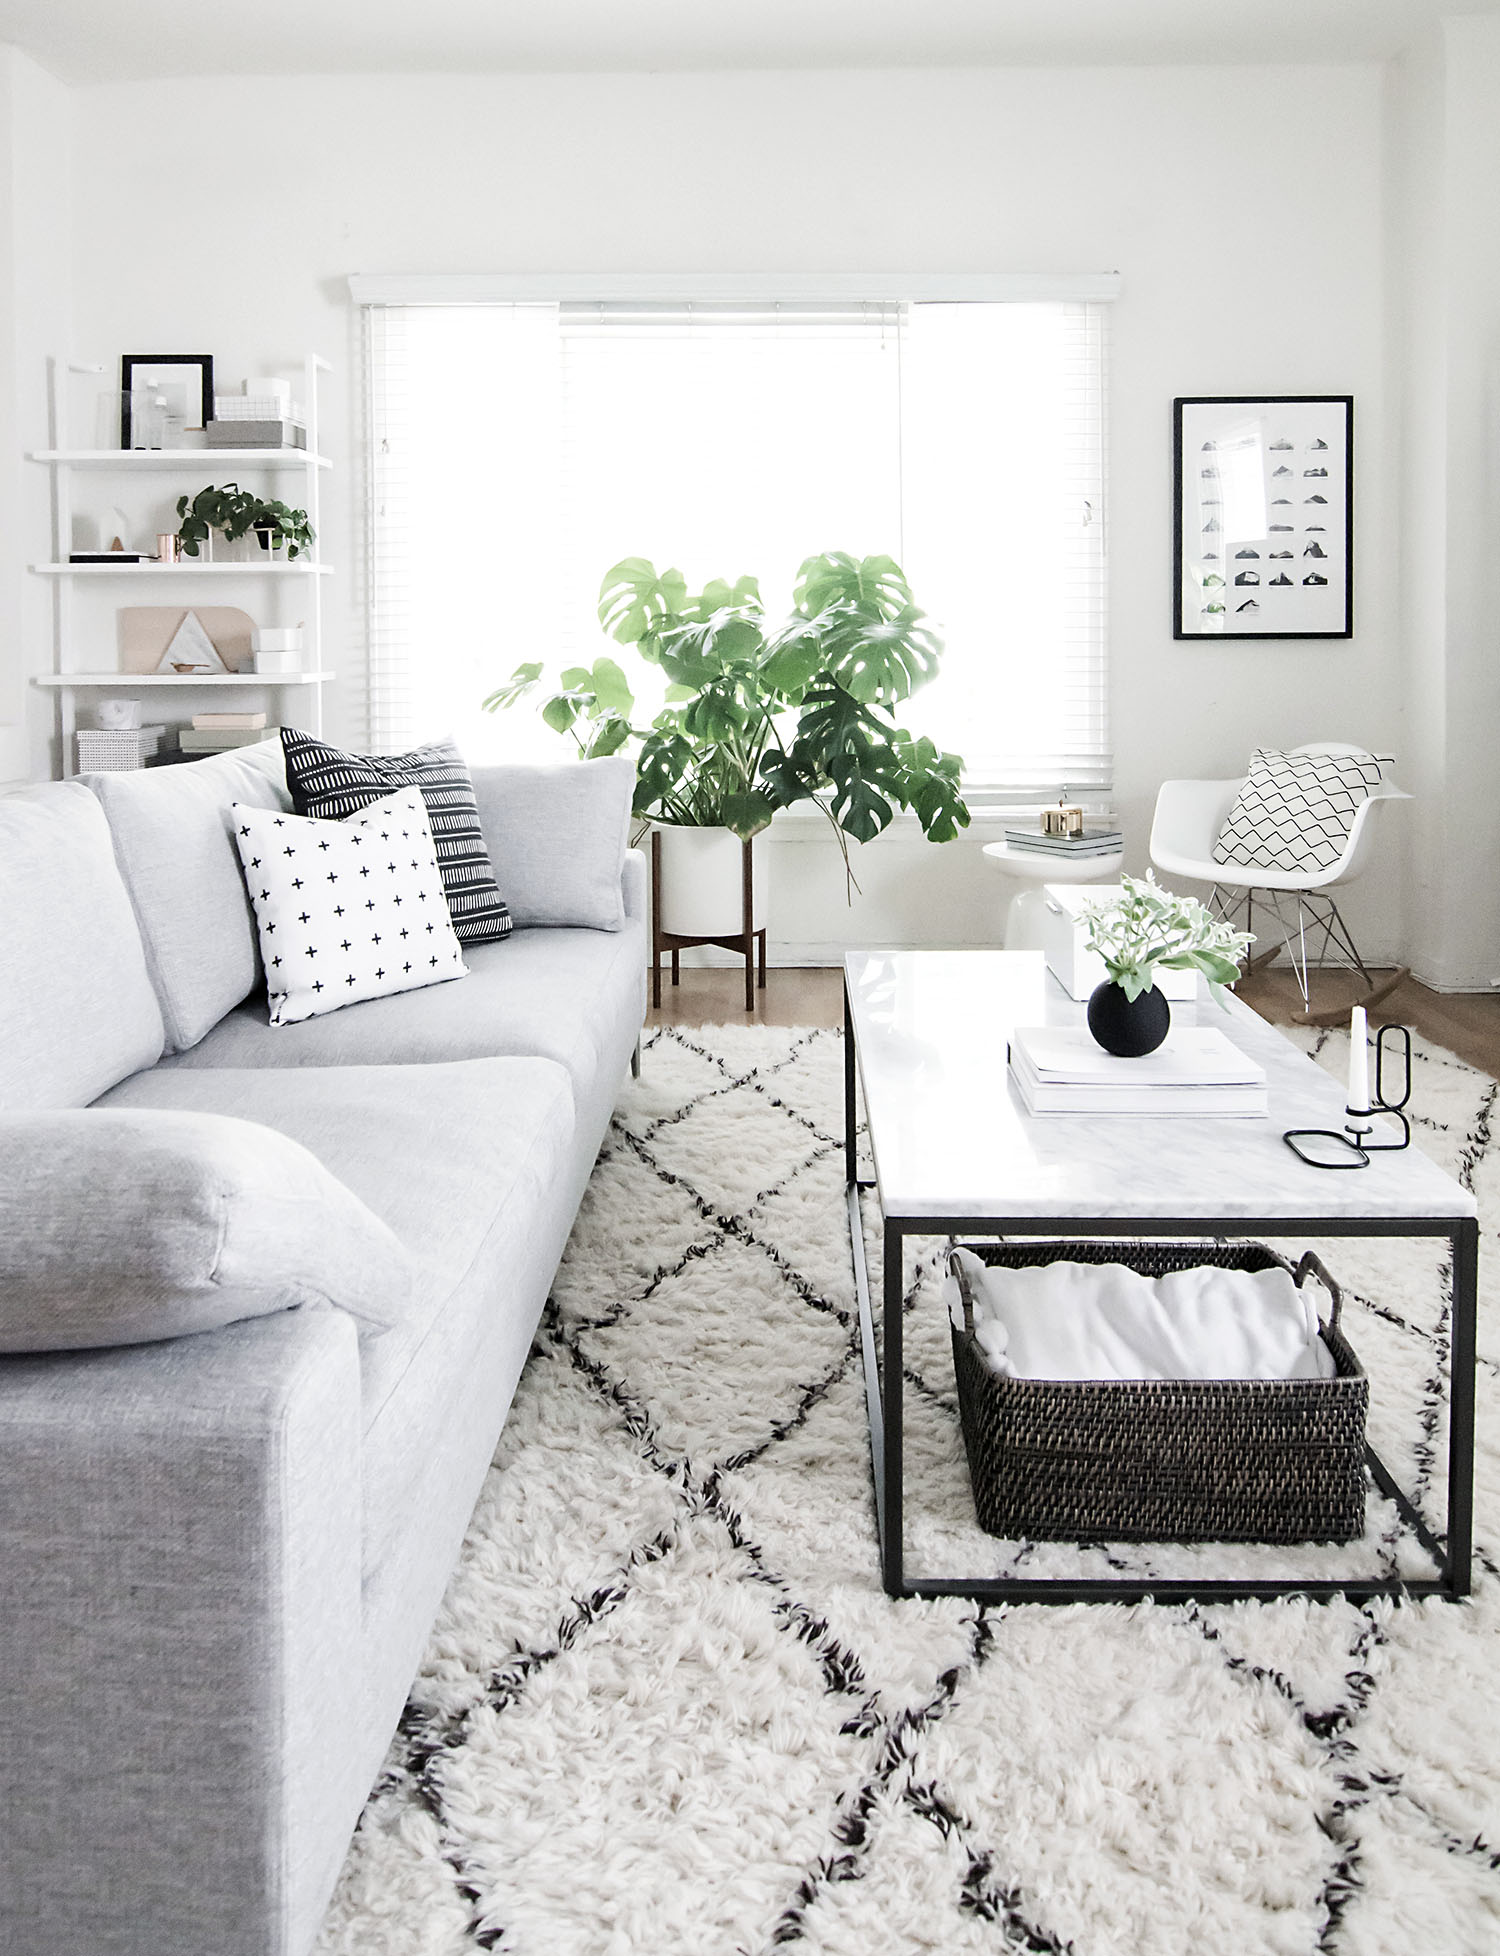 How to style your coffee table and make
it look exciting